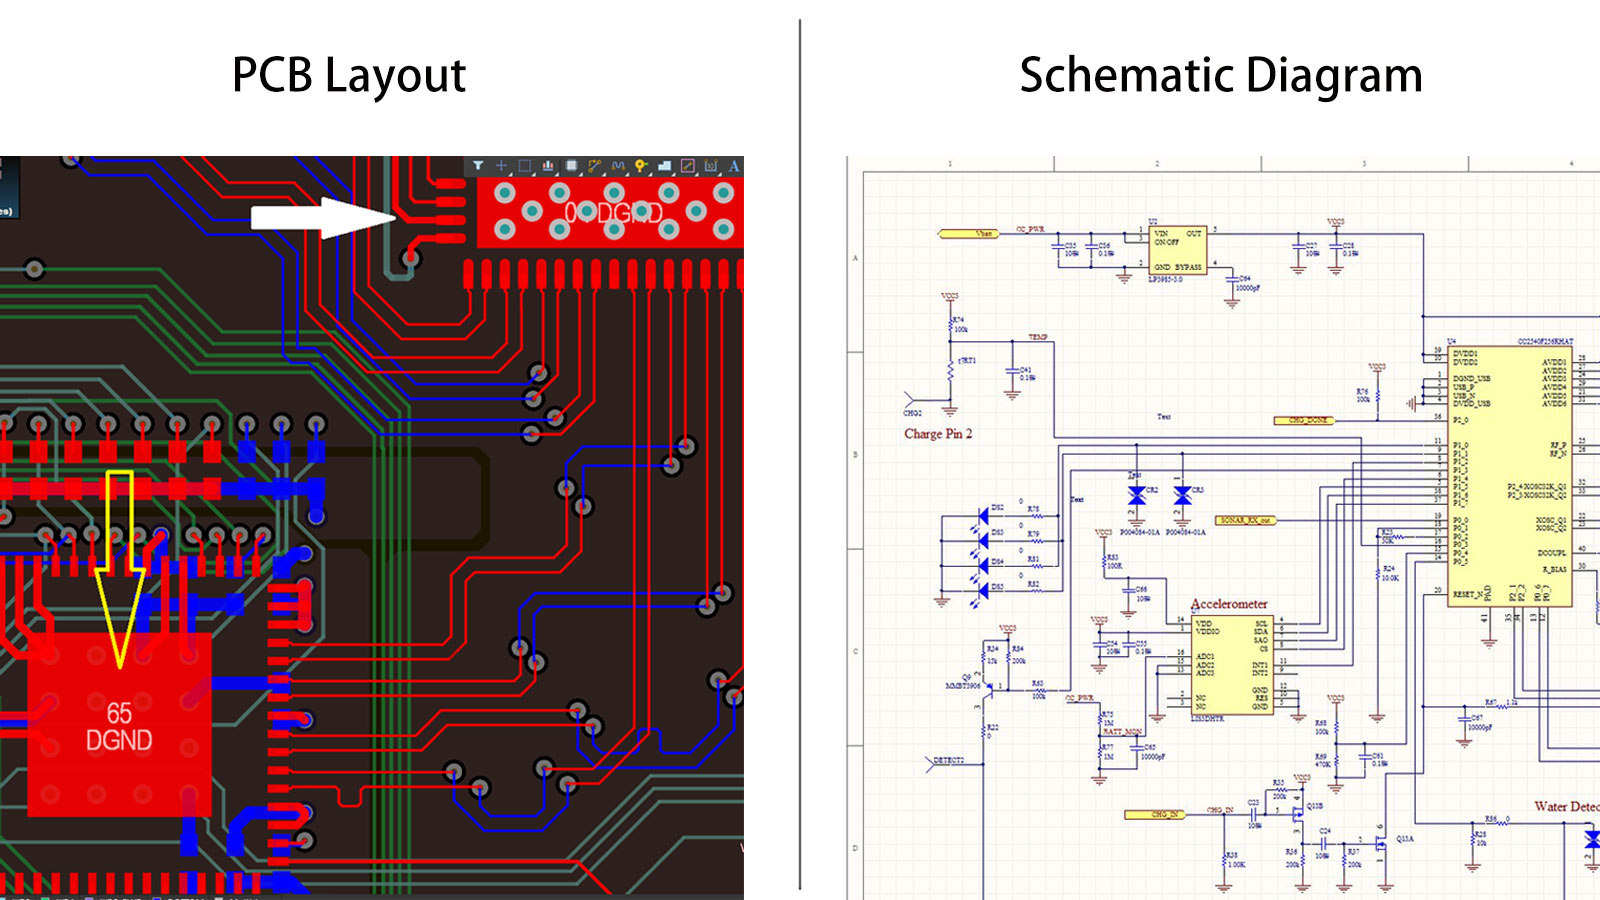 PCB Schematic vs PCB Layout